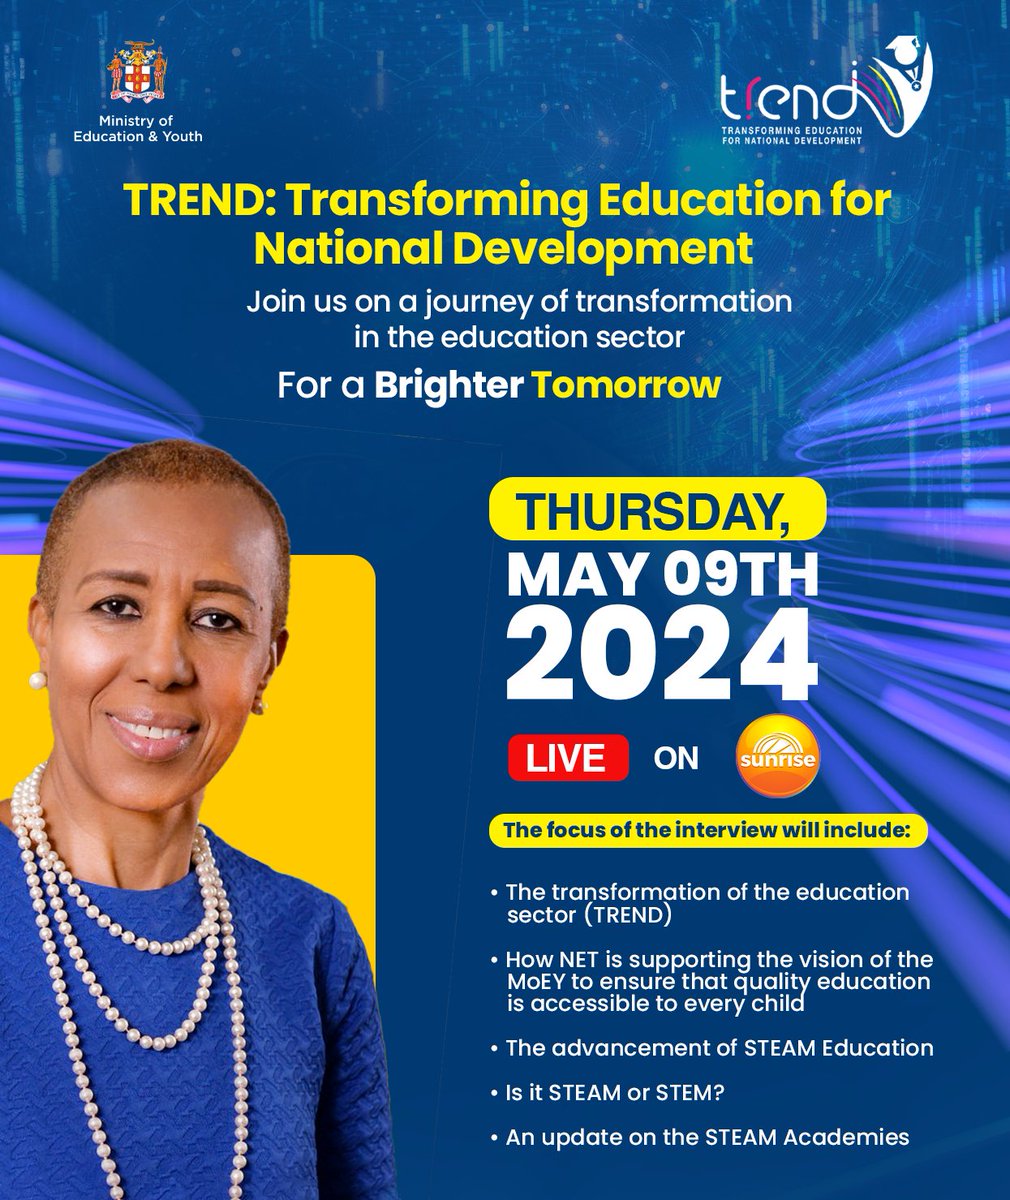 This week is Education Week, and as we highlight student achievements, honour dedicated educators, and foster equity, don't miss Minister Fayval Williams' live interview tomorrow on CVM at Sunrise, discussing education transformation, NET's support, STEAM advancements, and more!